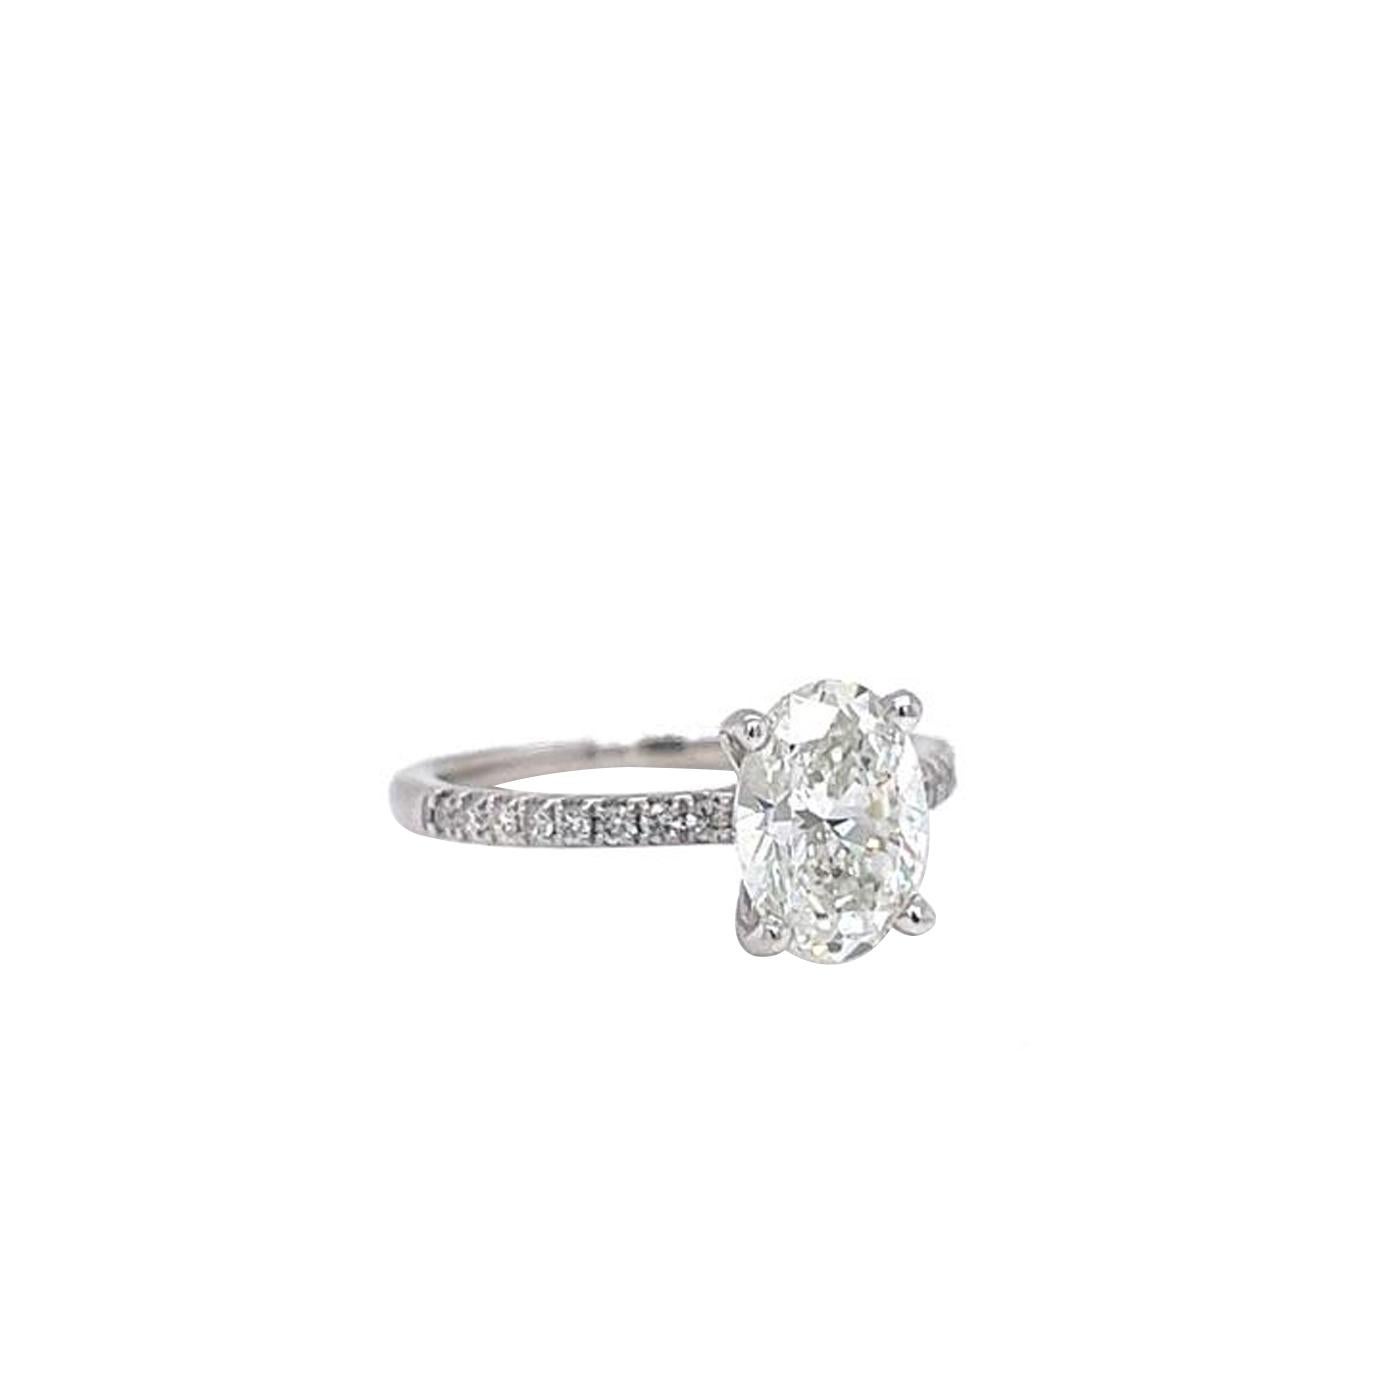 Exceptional GIA 1.70 Carat Oval Diamond with 0.55ct Pave Diamond Ring Flawless For Sale 2